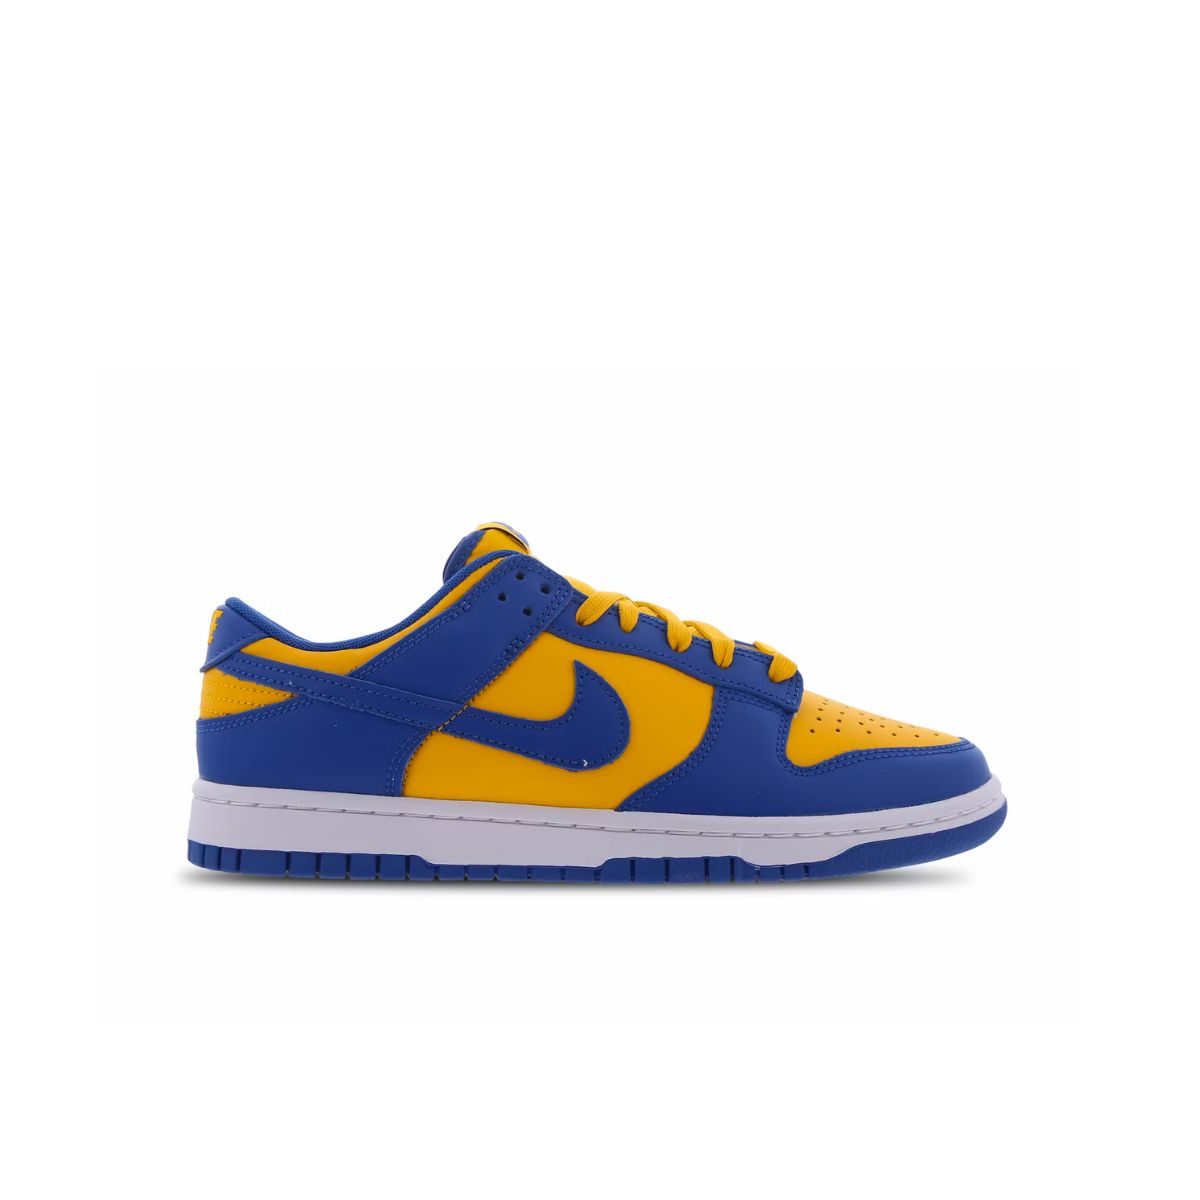 Golden Yellow Nike Dunks Shoelace Replacements